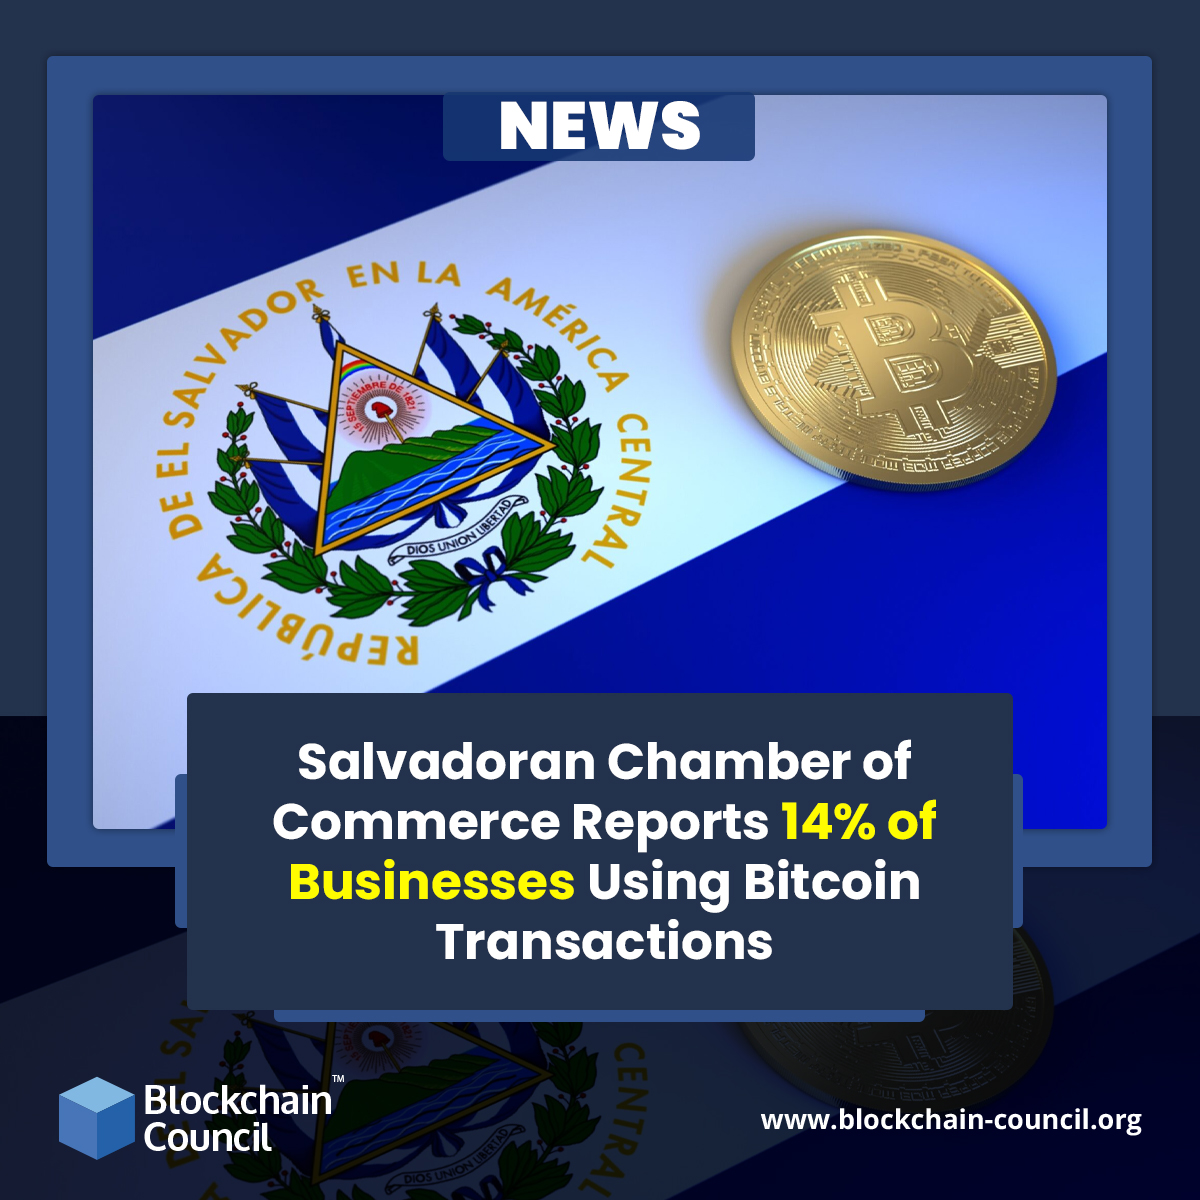 Salvadoran Chamber of Commerce Reports 14% of Businesses Using Bitcoin Transactions